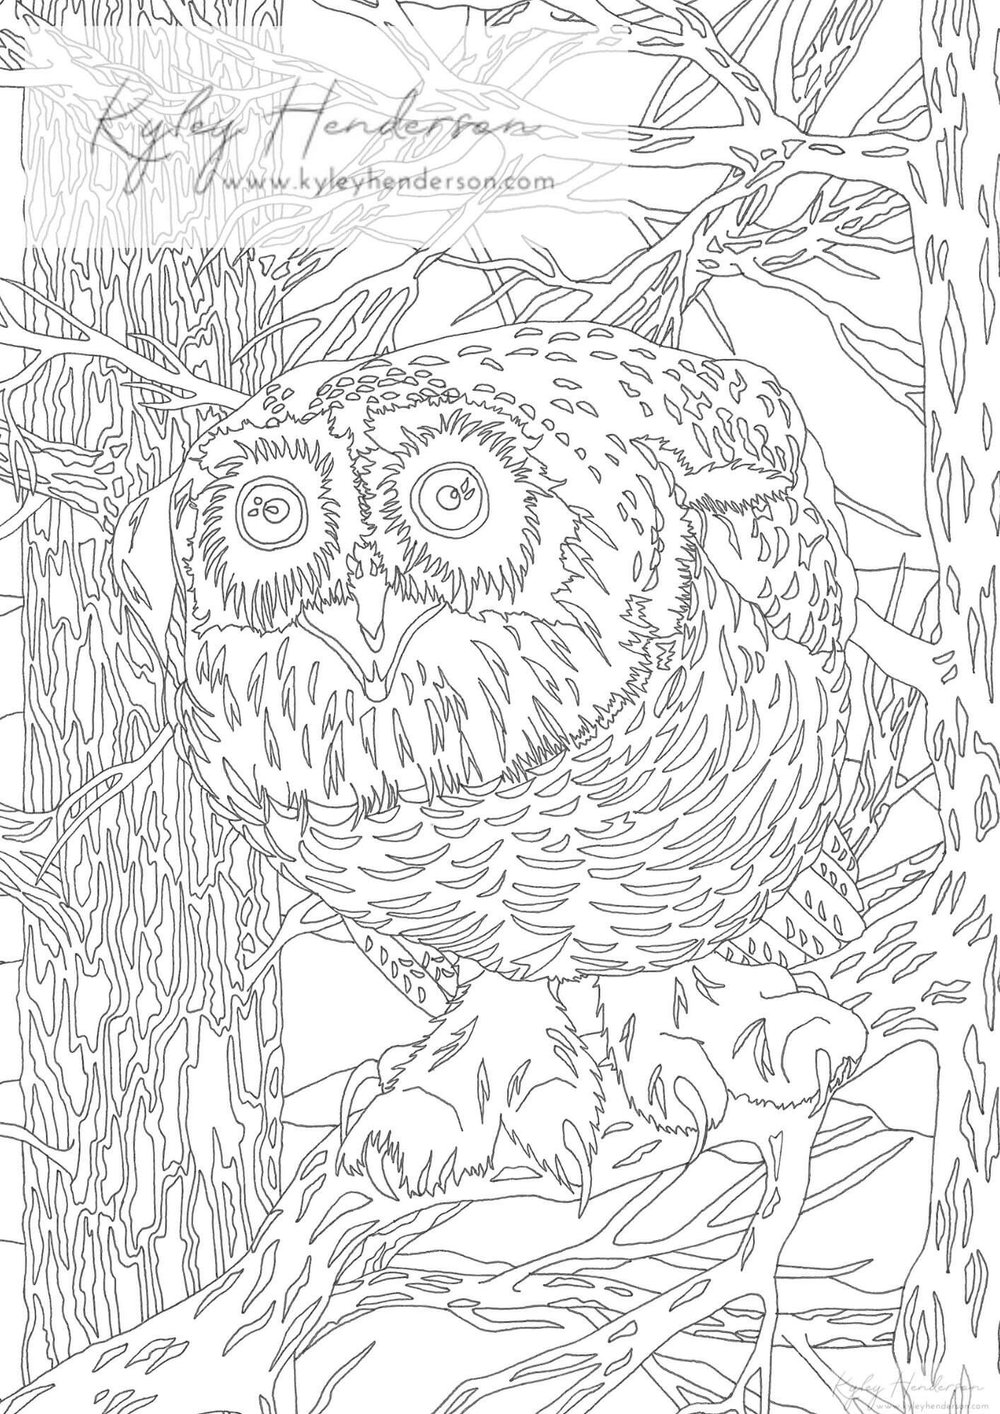 Snowy owl adult coloring pages owl coloring page digital instant download coloring sheet of an owl â kyley henderson art